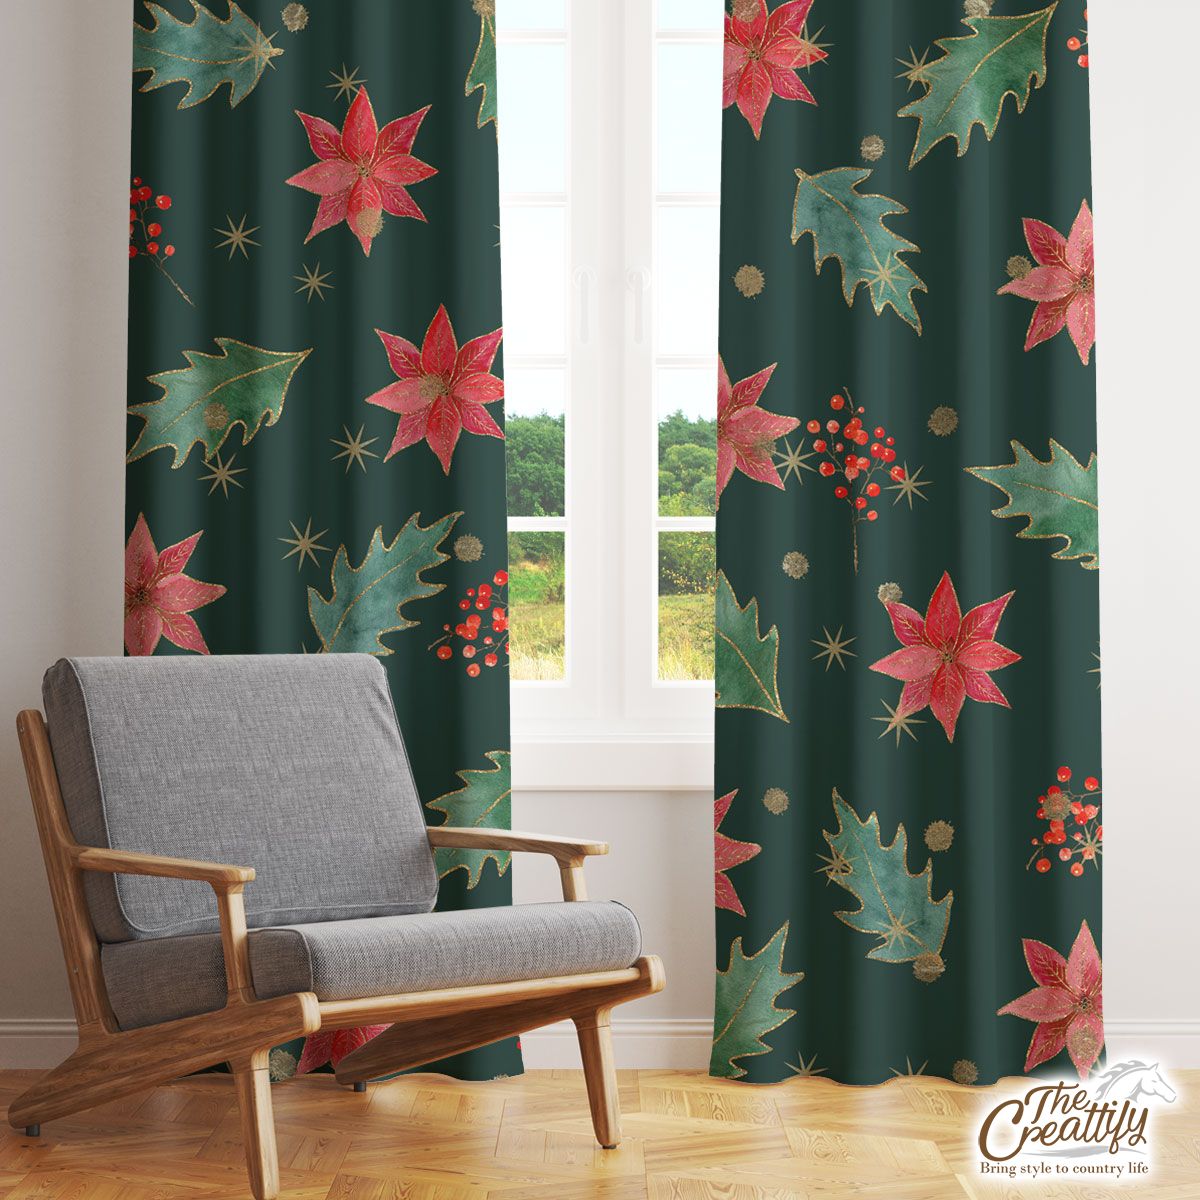 Poinsettias For Christmas And Holly Leaf Pattern Window Curtain